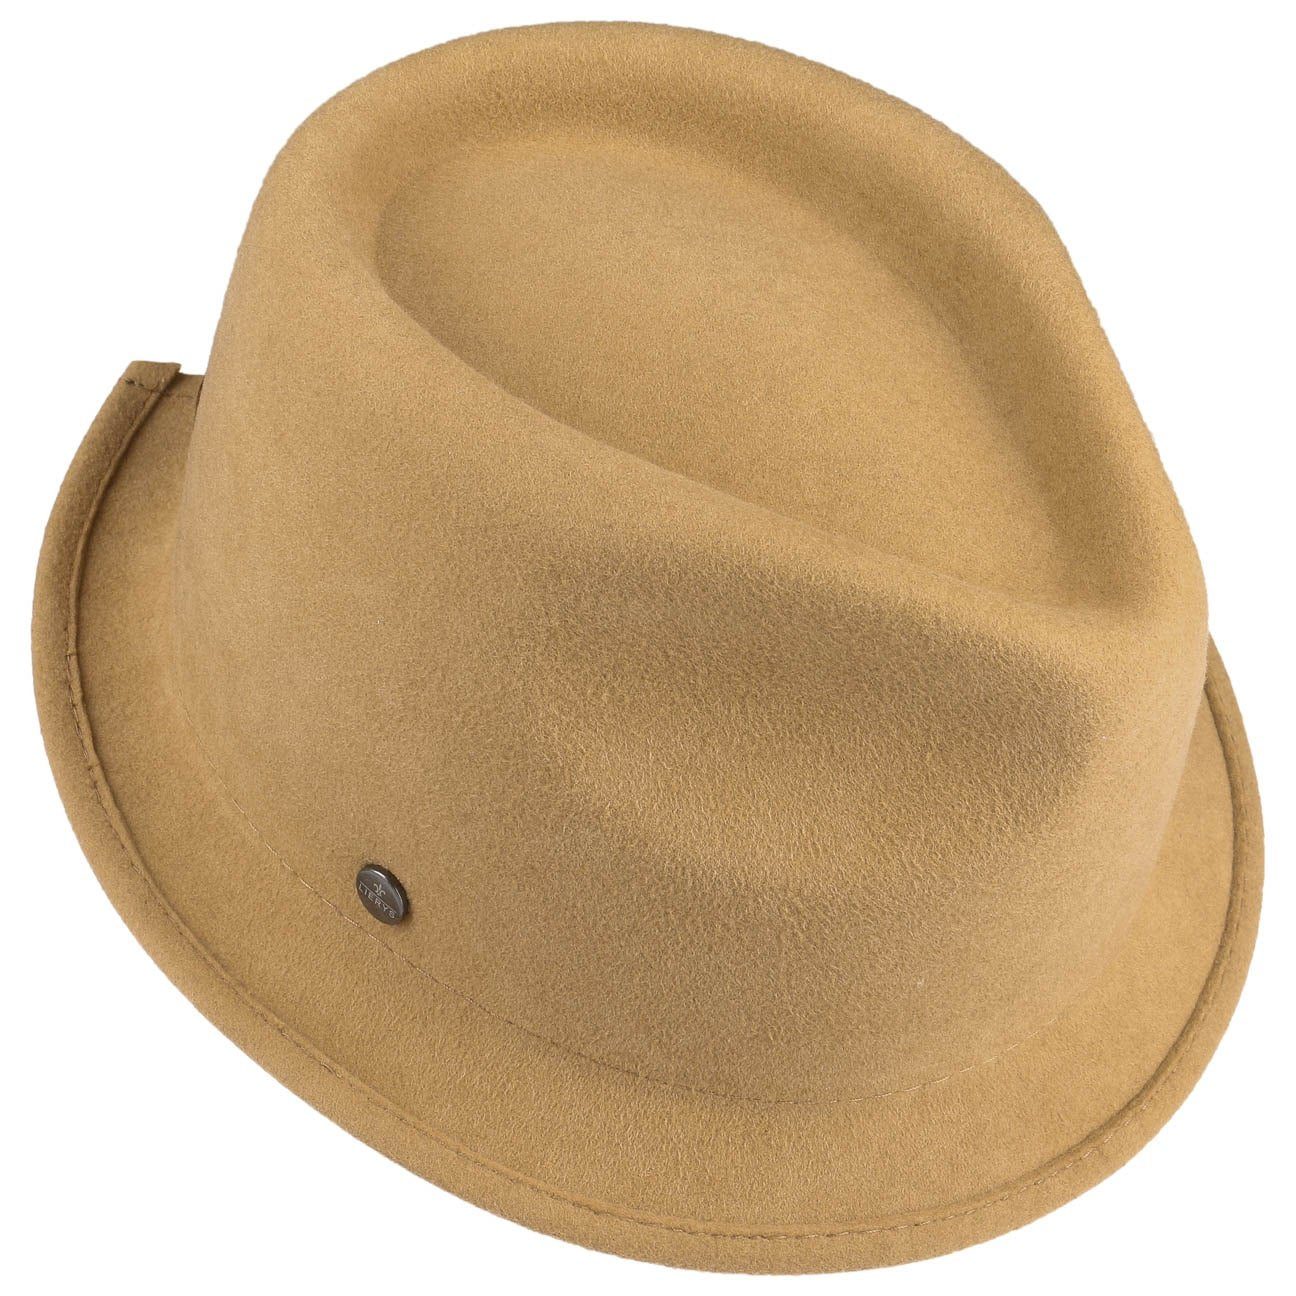 Lierys the in EU Wollhut, Made (1-St) Trilby